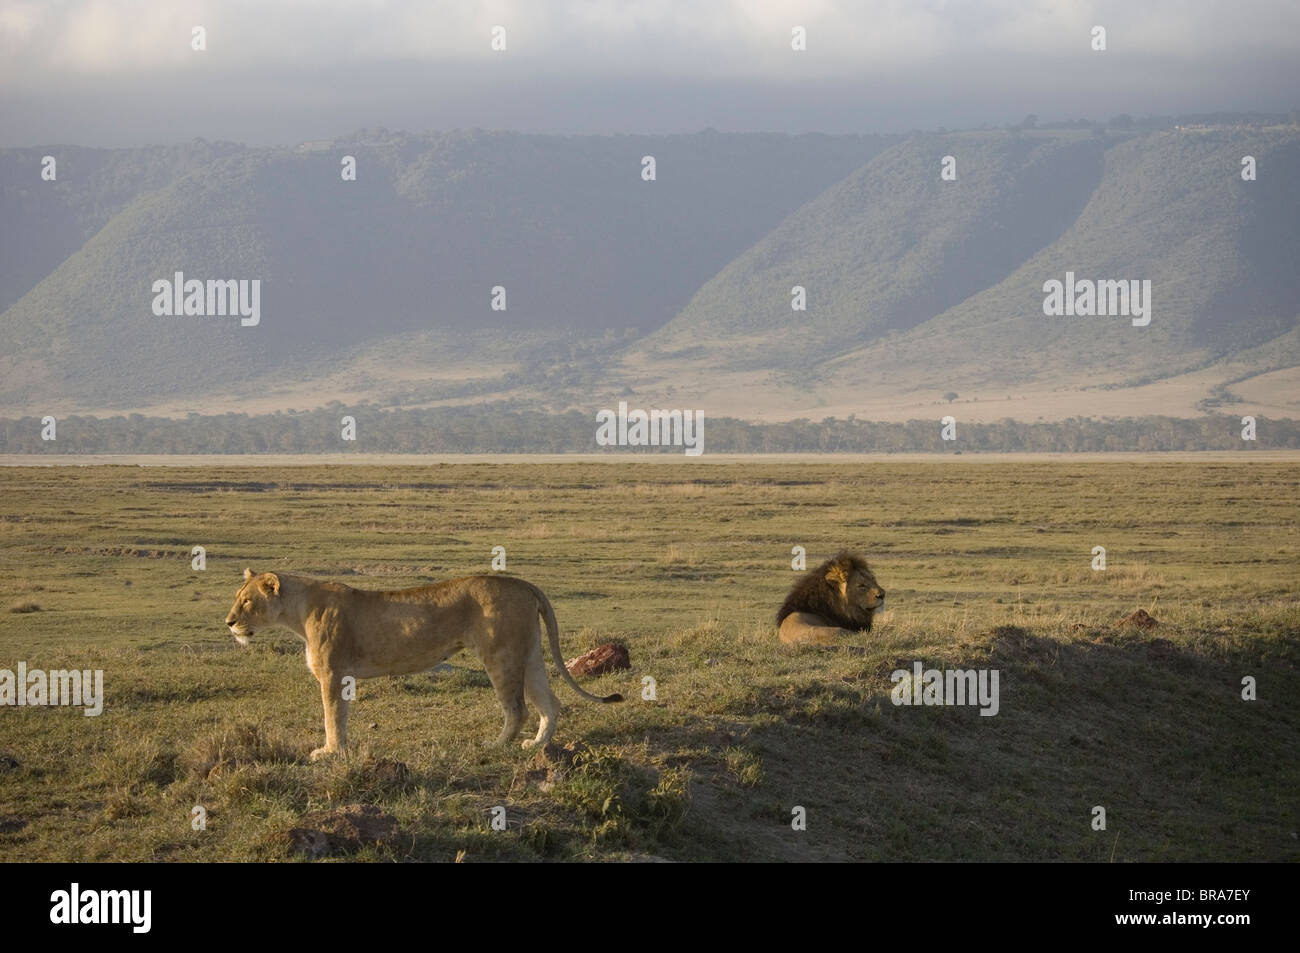 LION AND STANDING LIONESS ON PLAINS NGORONGORO CRATER TANZANIA AFRICA Stock Photo